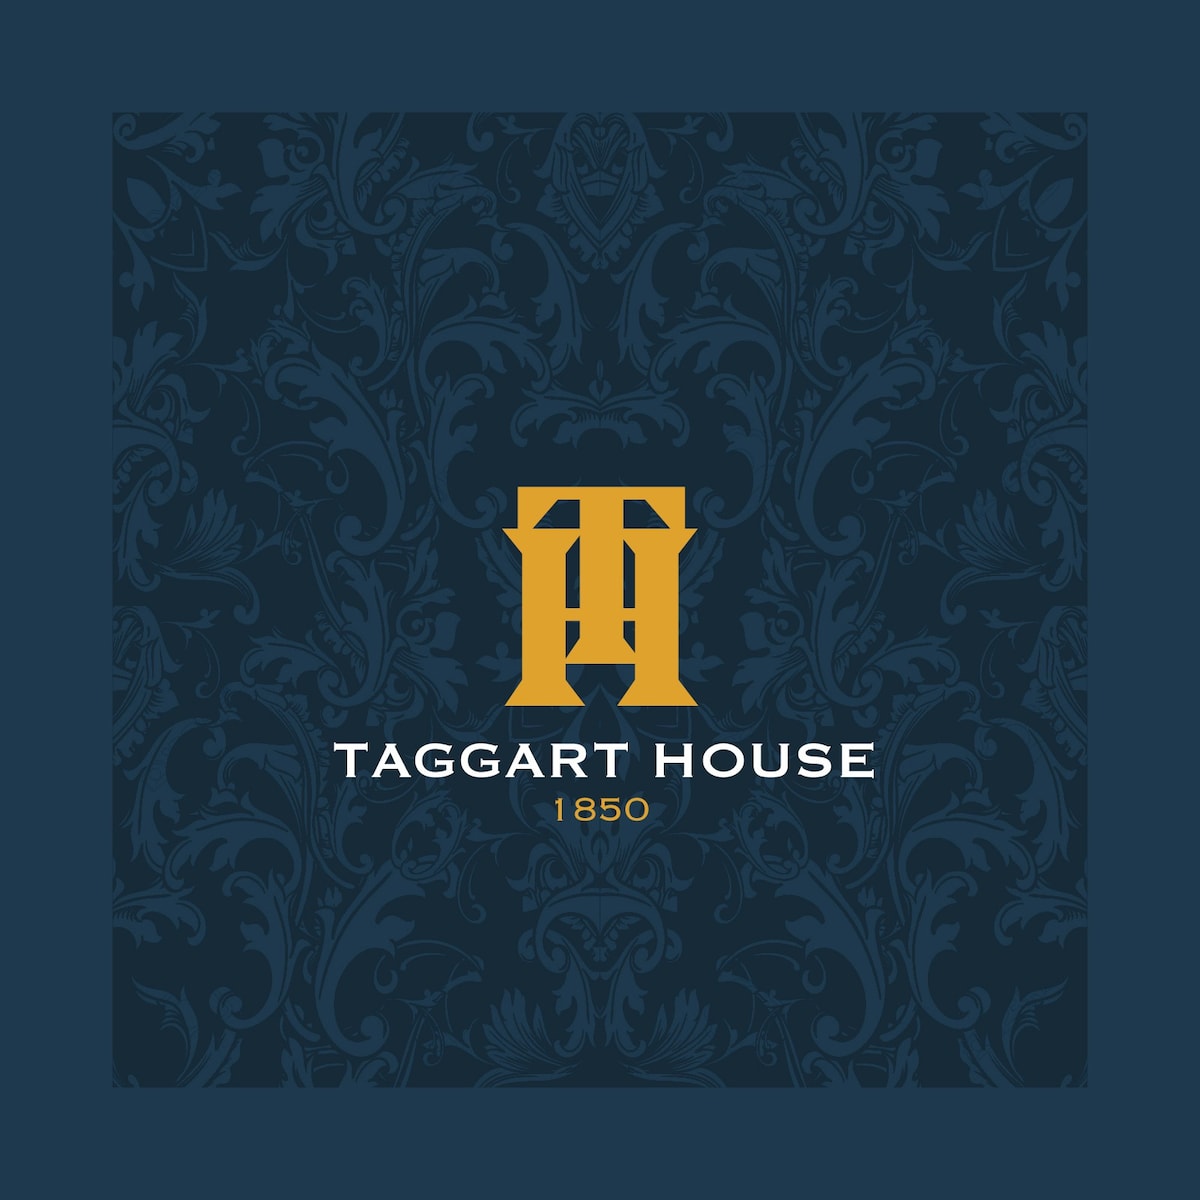 The Taggart House